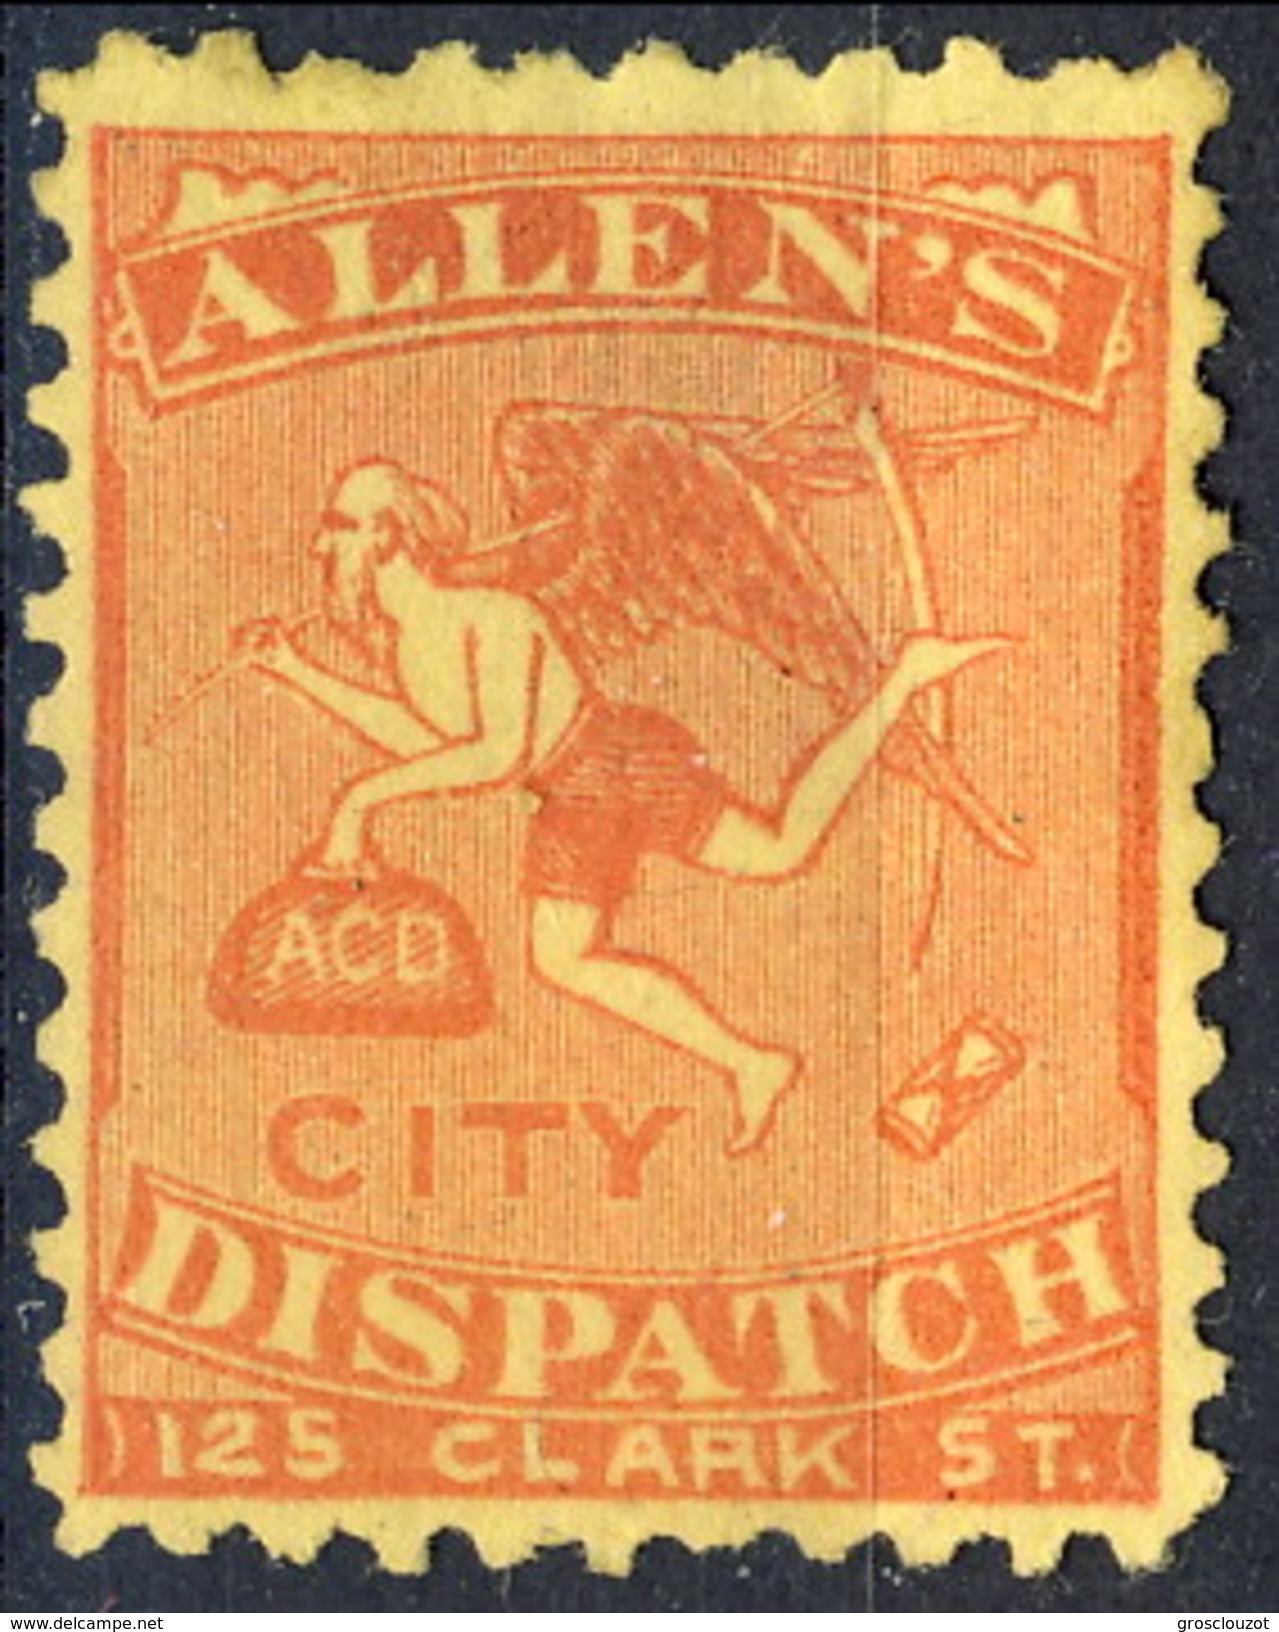 US Sc# 3L3 LOCAL Allen's City Dispatch 125-Clark Street, Red Yellow 1883 $400 - Sellos Locales